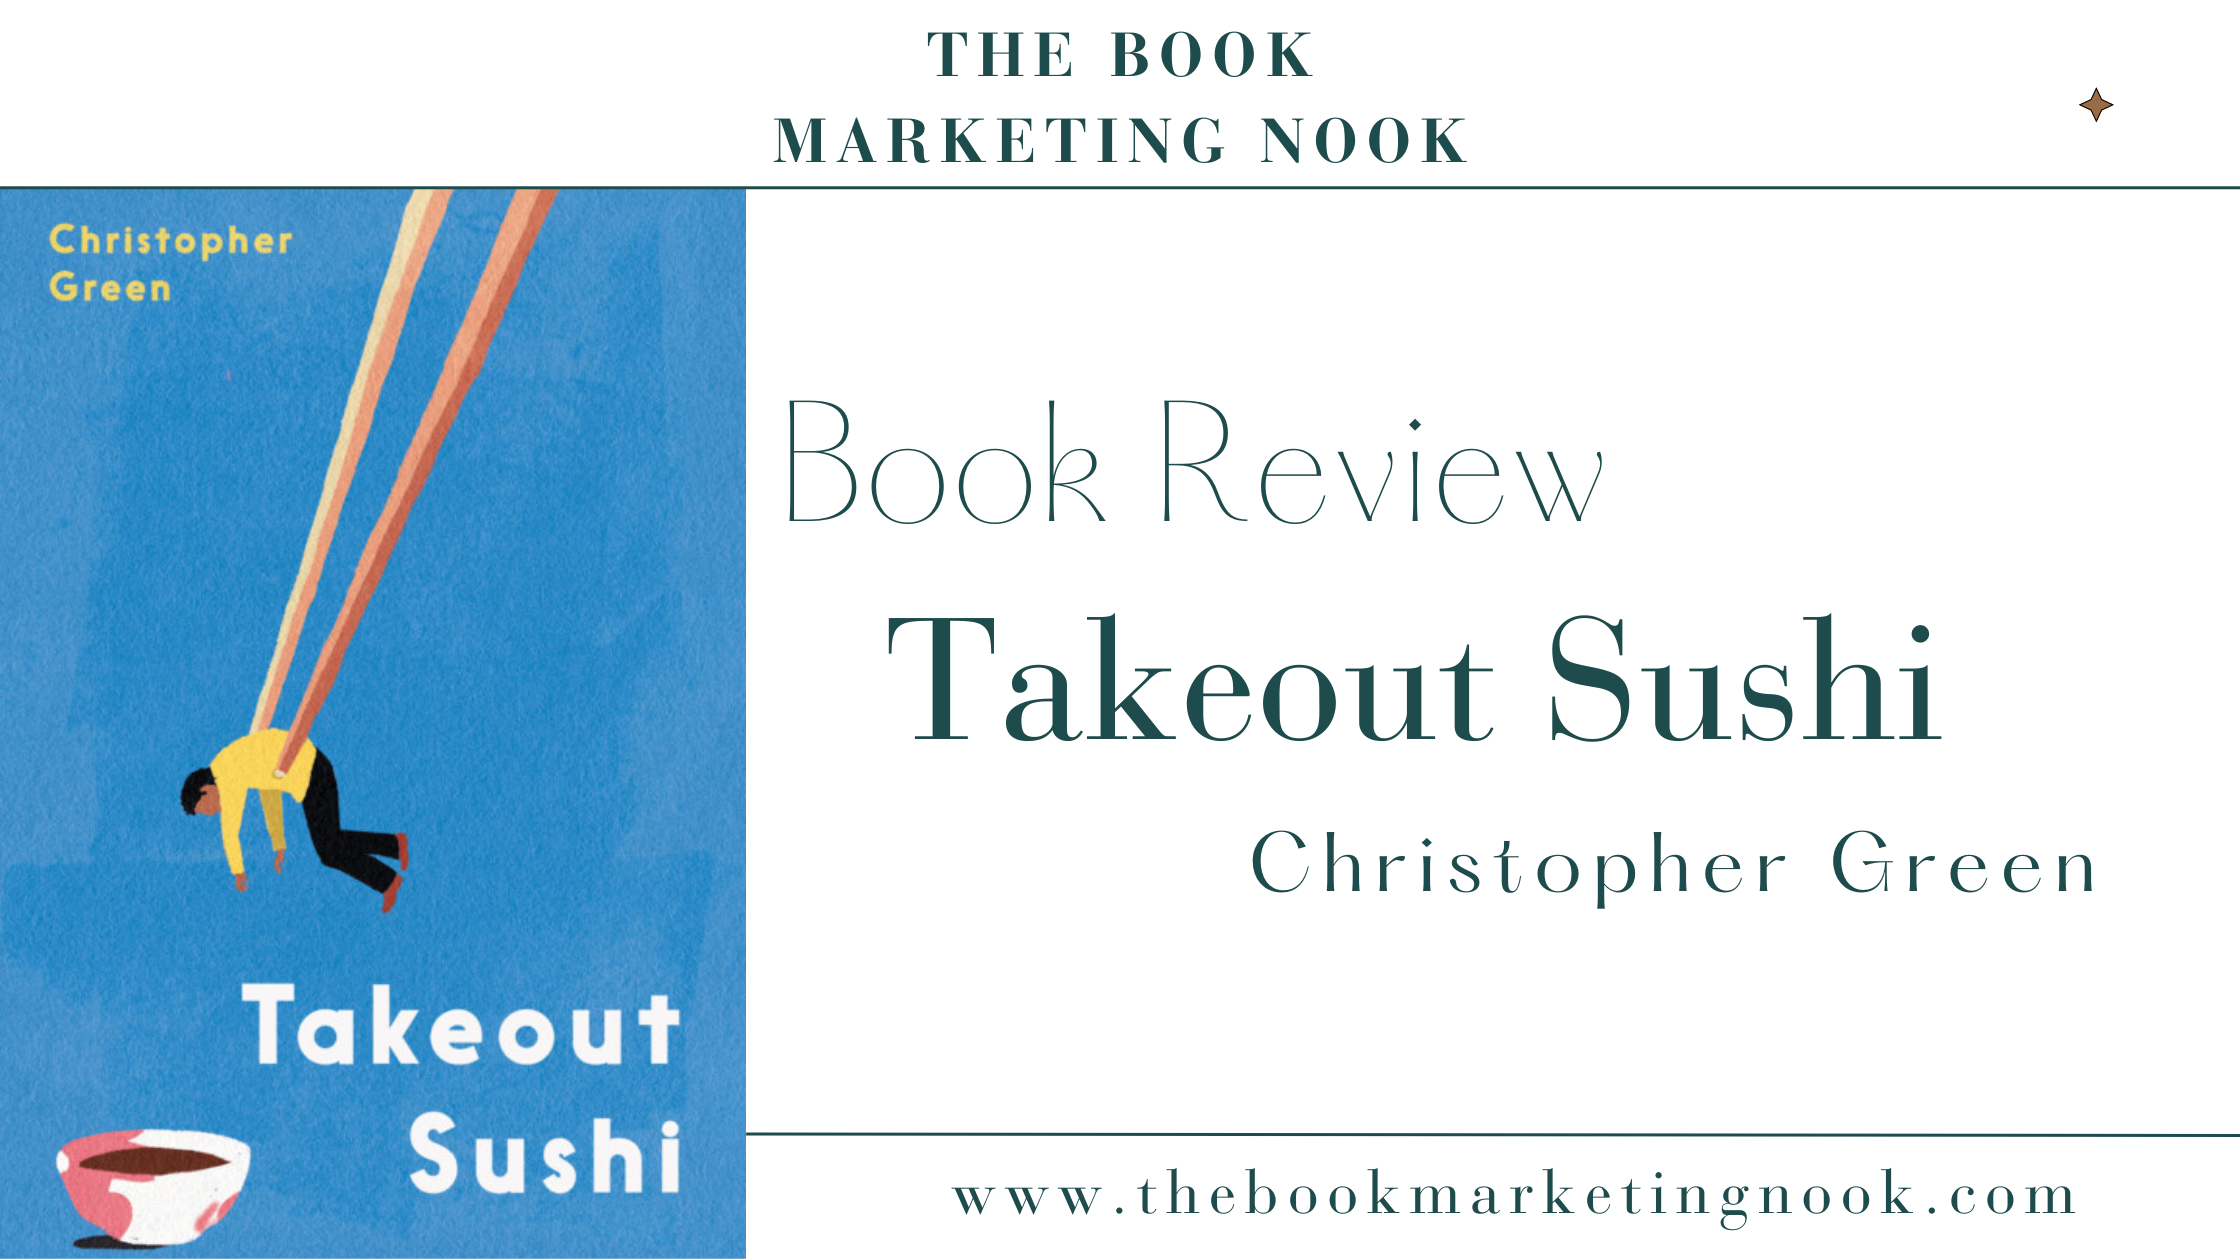 Book Review: Takeout Sushi by Christopher Green